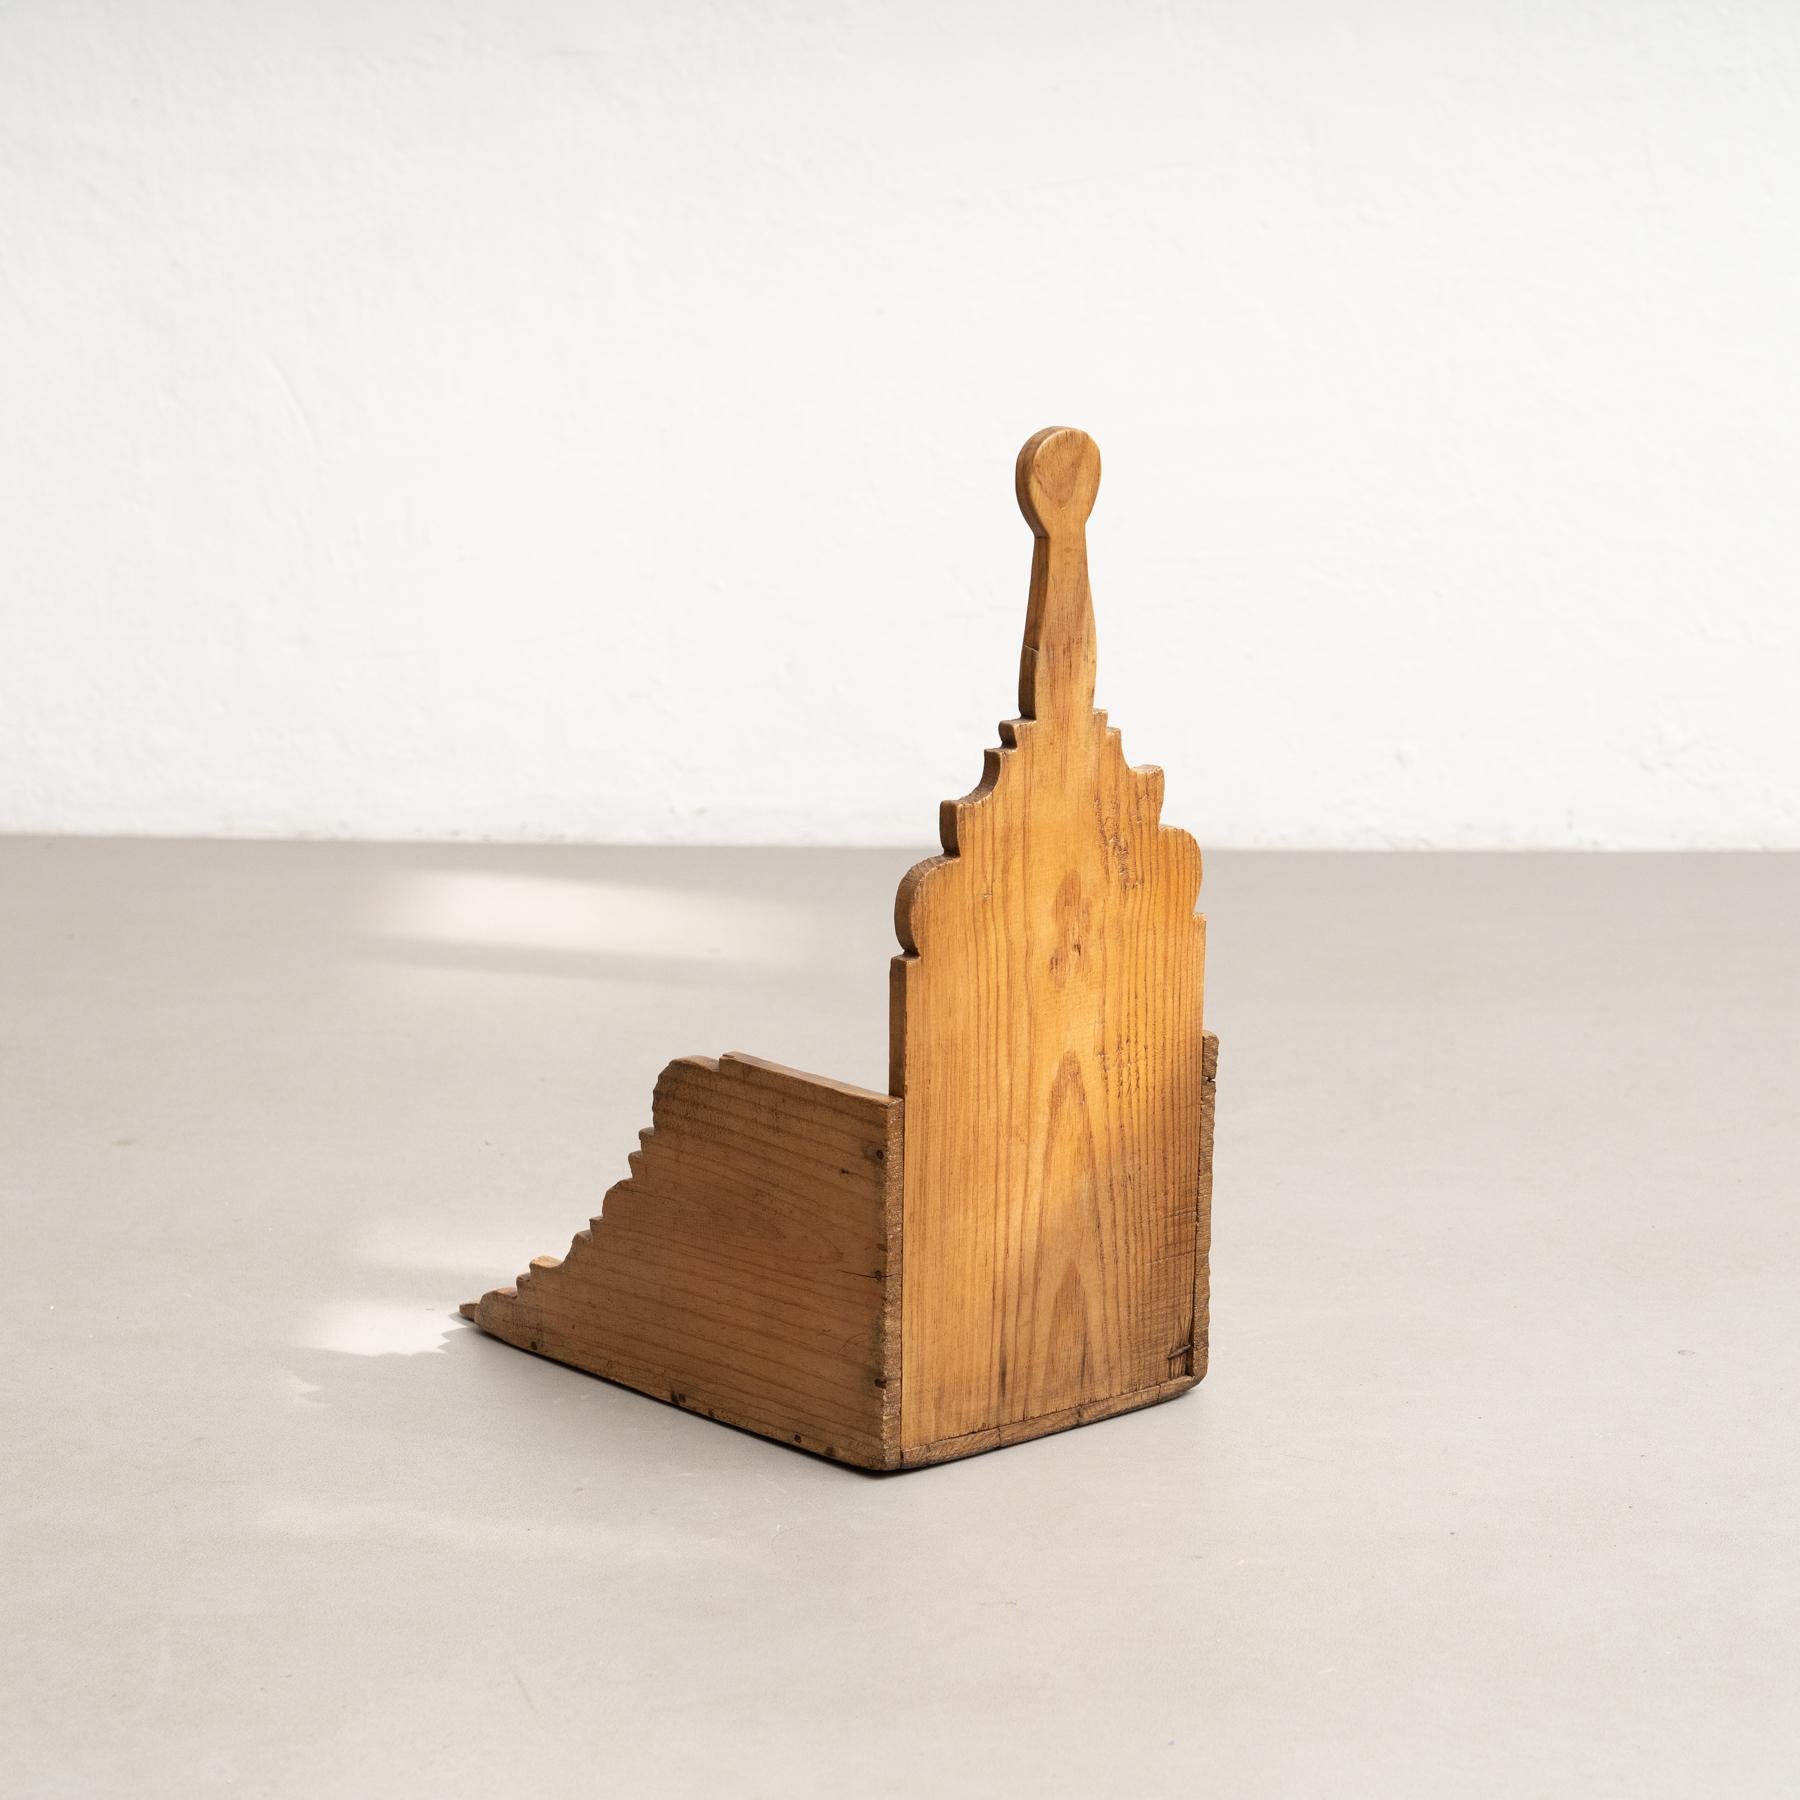 Early 20th Century Rustic Sculptural Wood Broom Dustpan For Sale 1